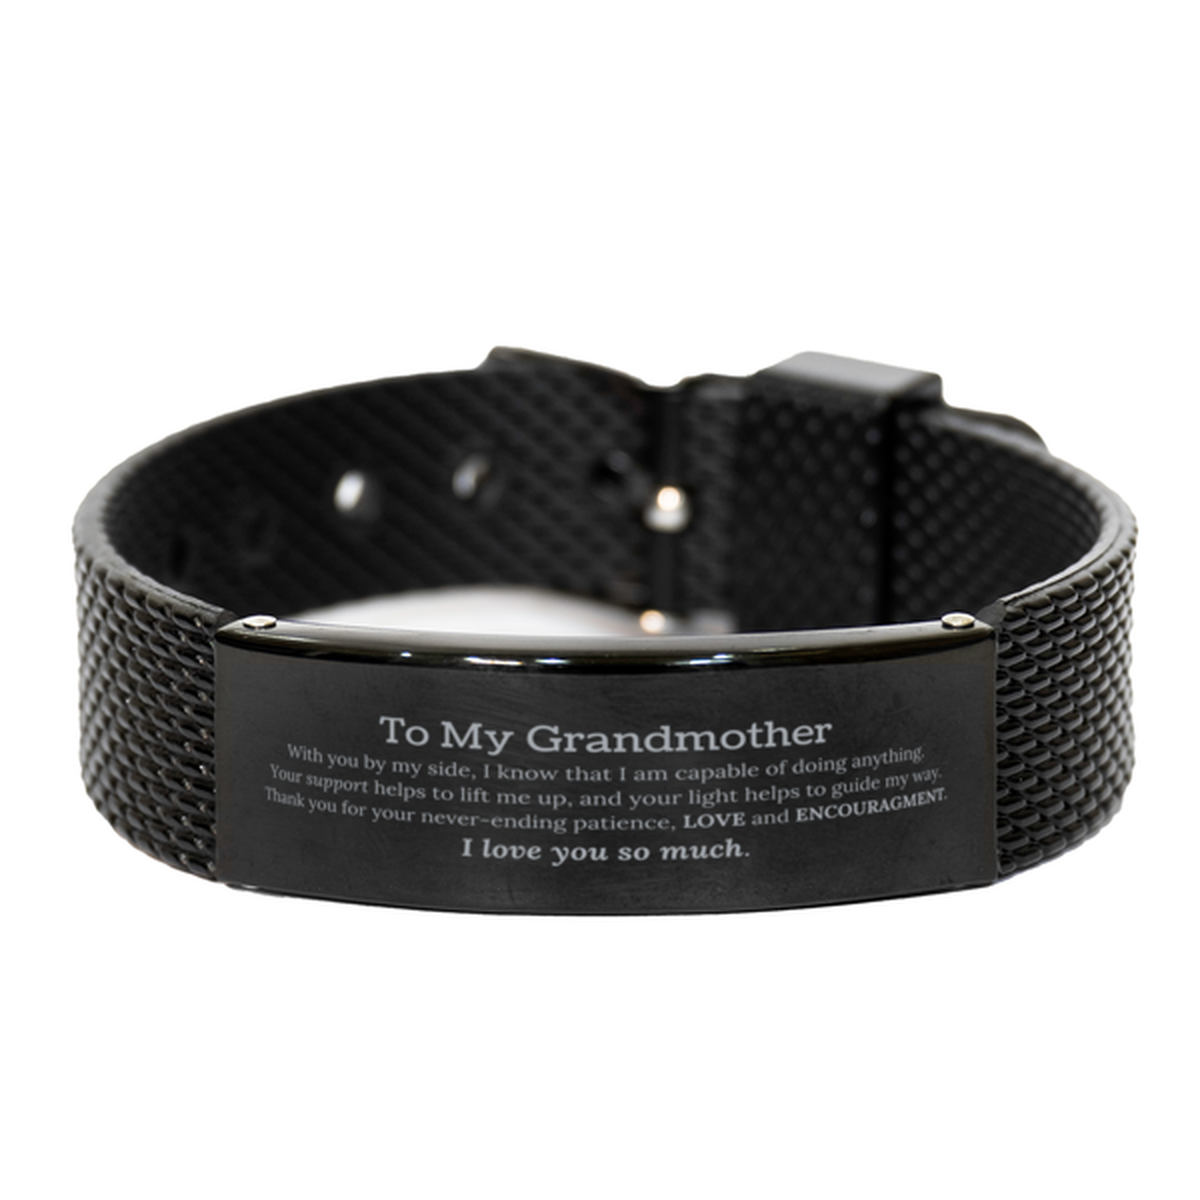 Appreciation Grandmother Black Shark Mesh Bracelet Gifts, To My Grandmother Birthday Christmas Wedding Keepsake Gifts for Grandmother With you by my side, I know that I am capable of doing anything. I love you so much